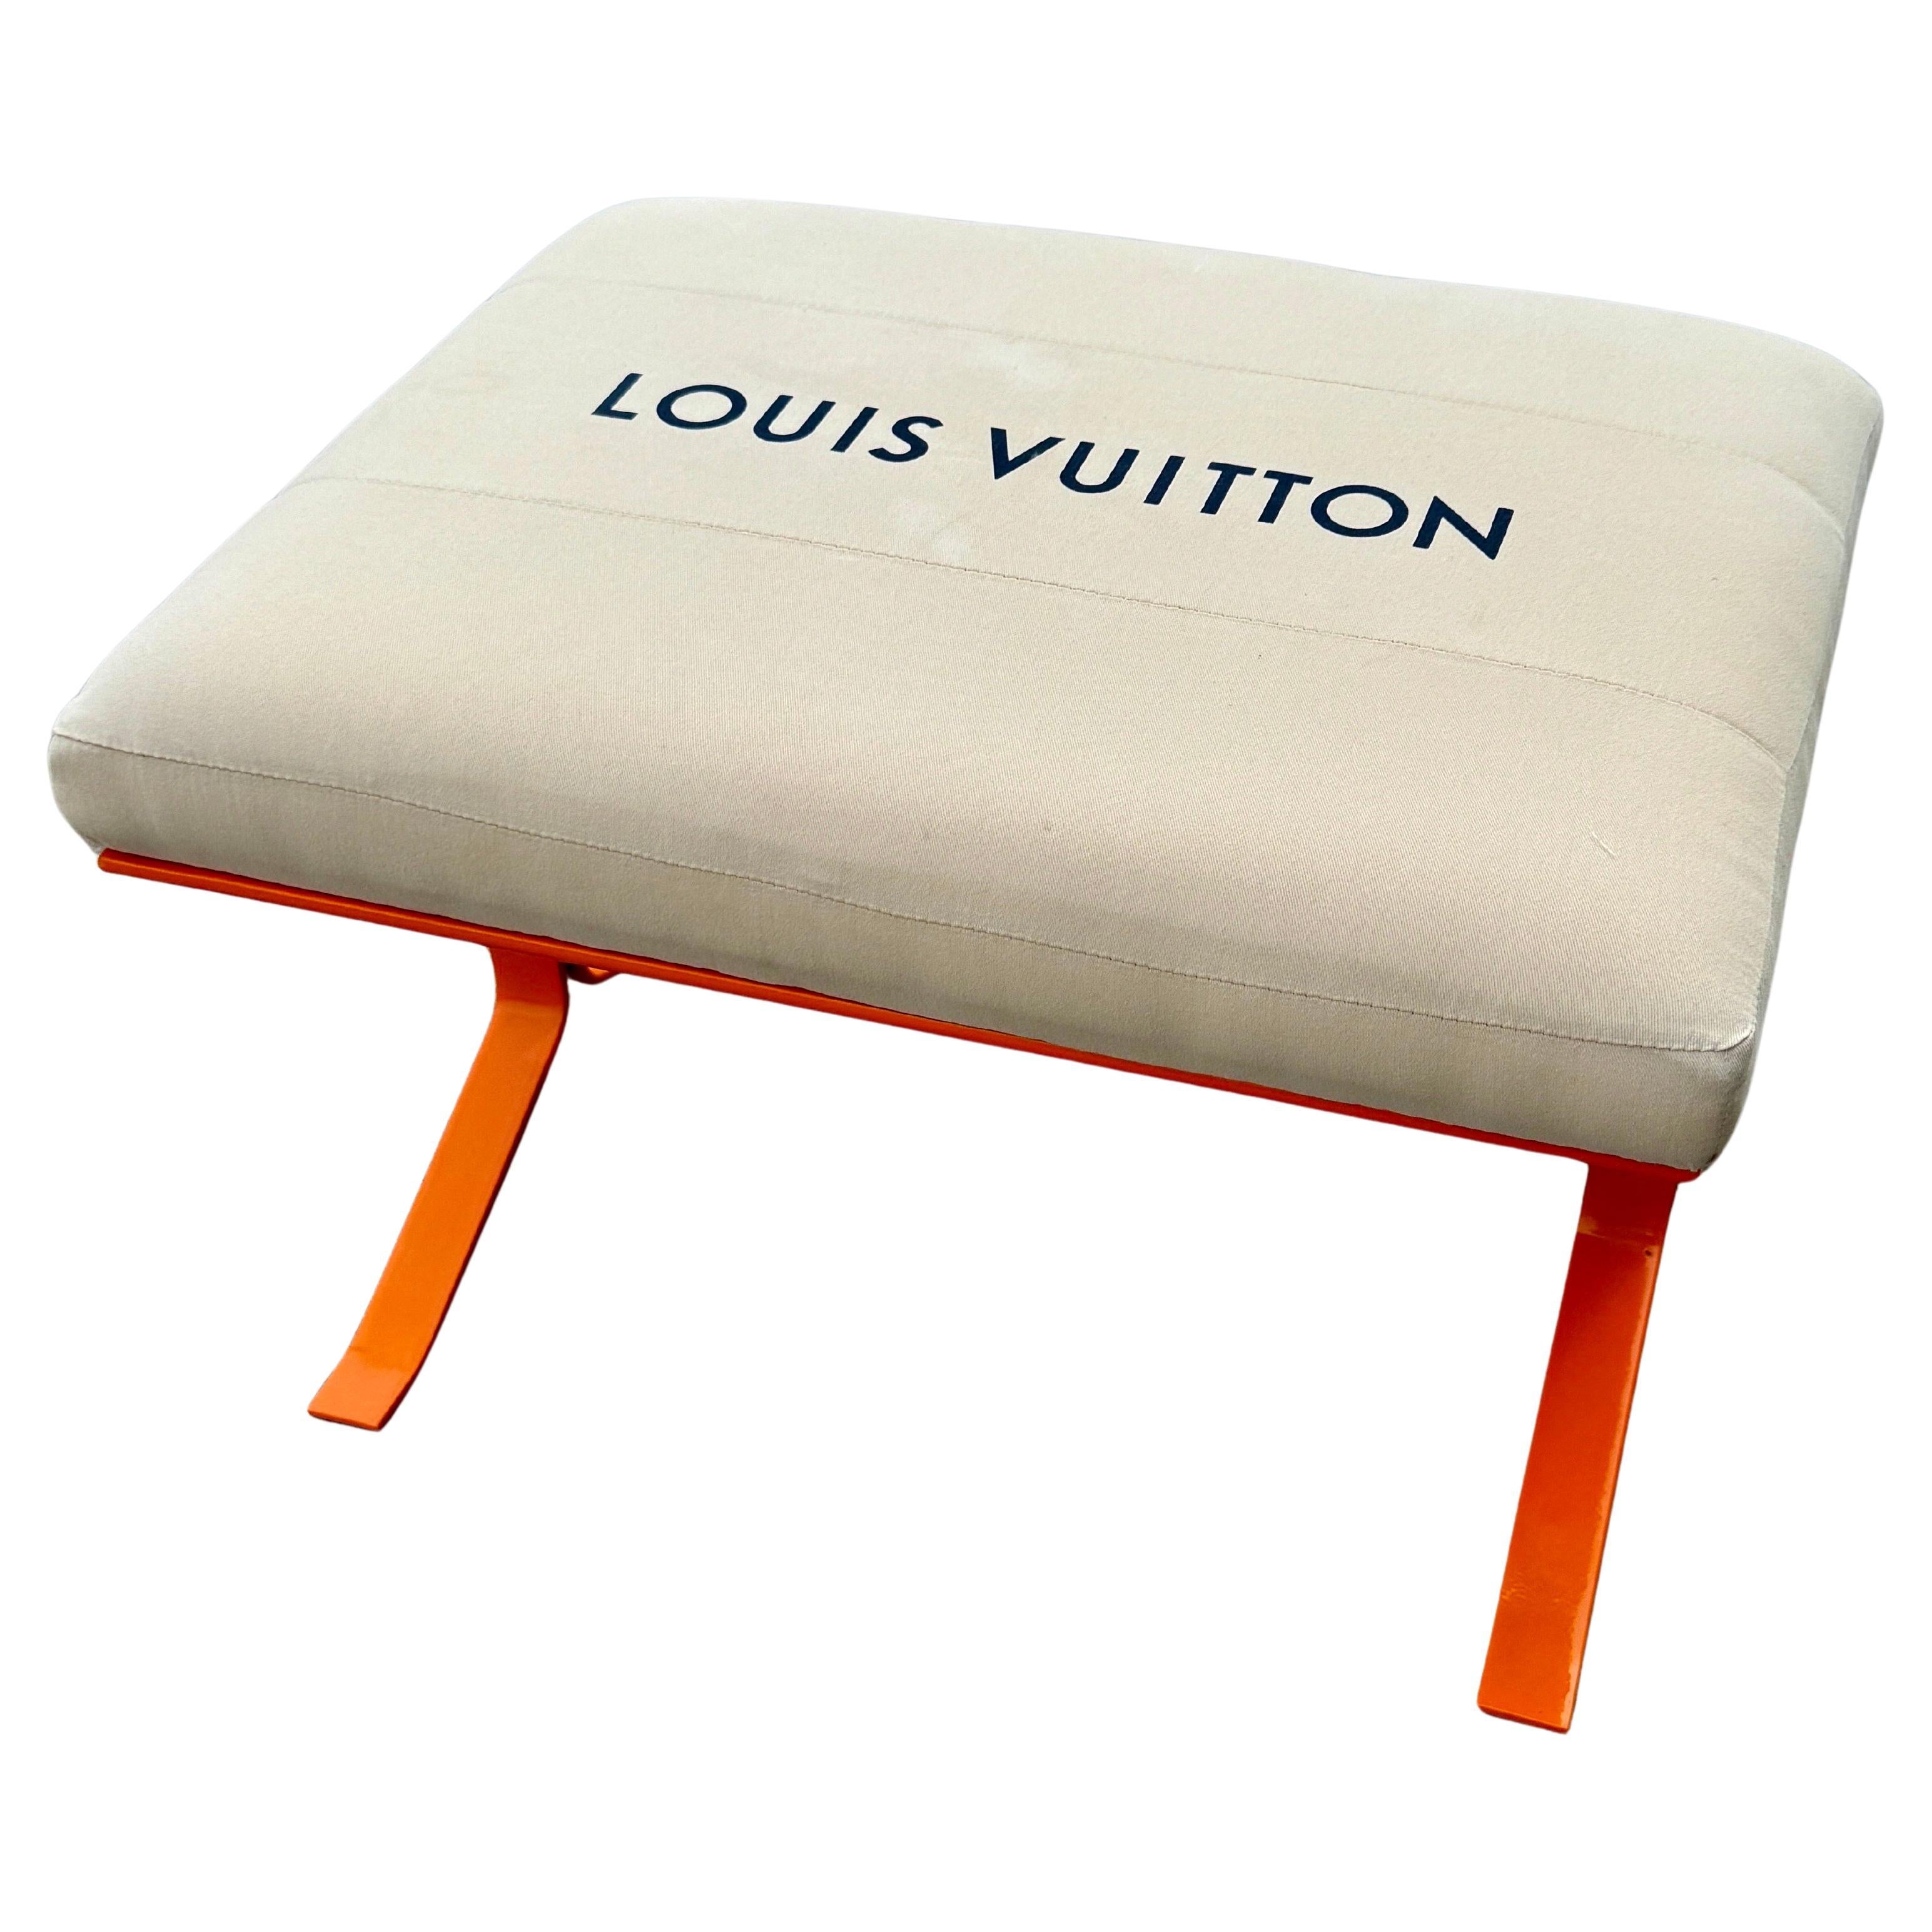 Mid-Century Modern Chrome Bench With Louis Vuitton Fabric

Design and purpose best describe this one-of-a-kind custom bench. This piece features authentic Louis Vuitton material atop a very sturdy powder-coated painted orange bench. The creation of